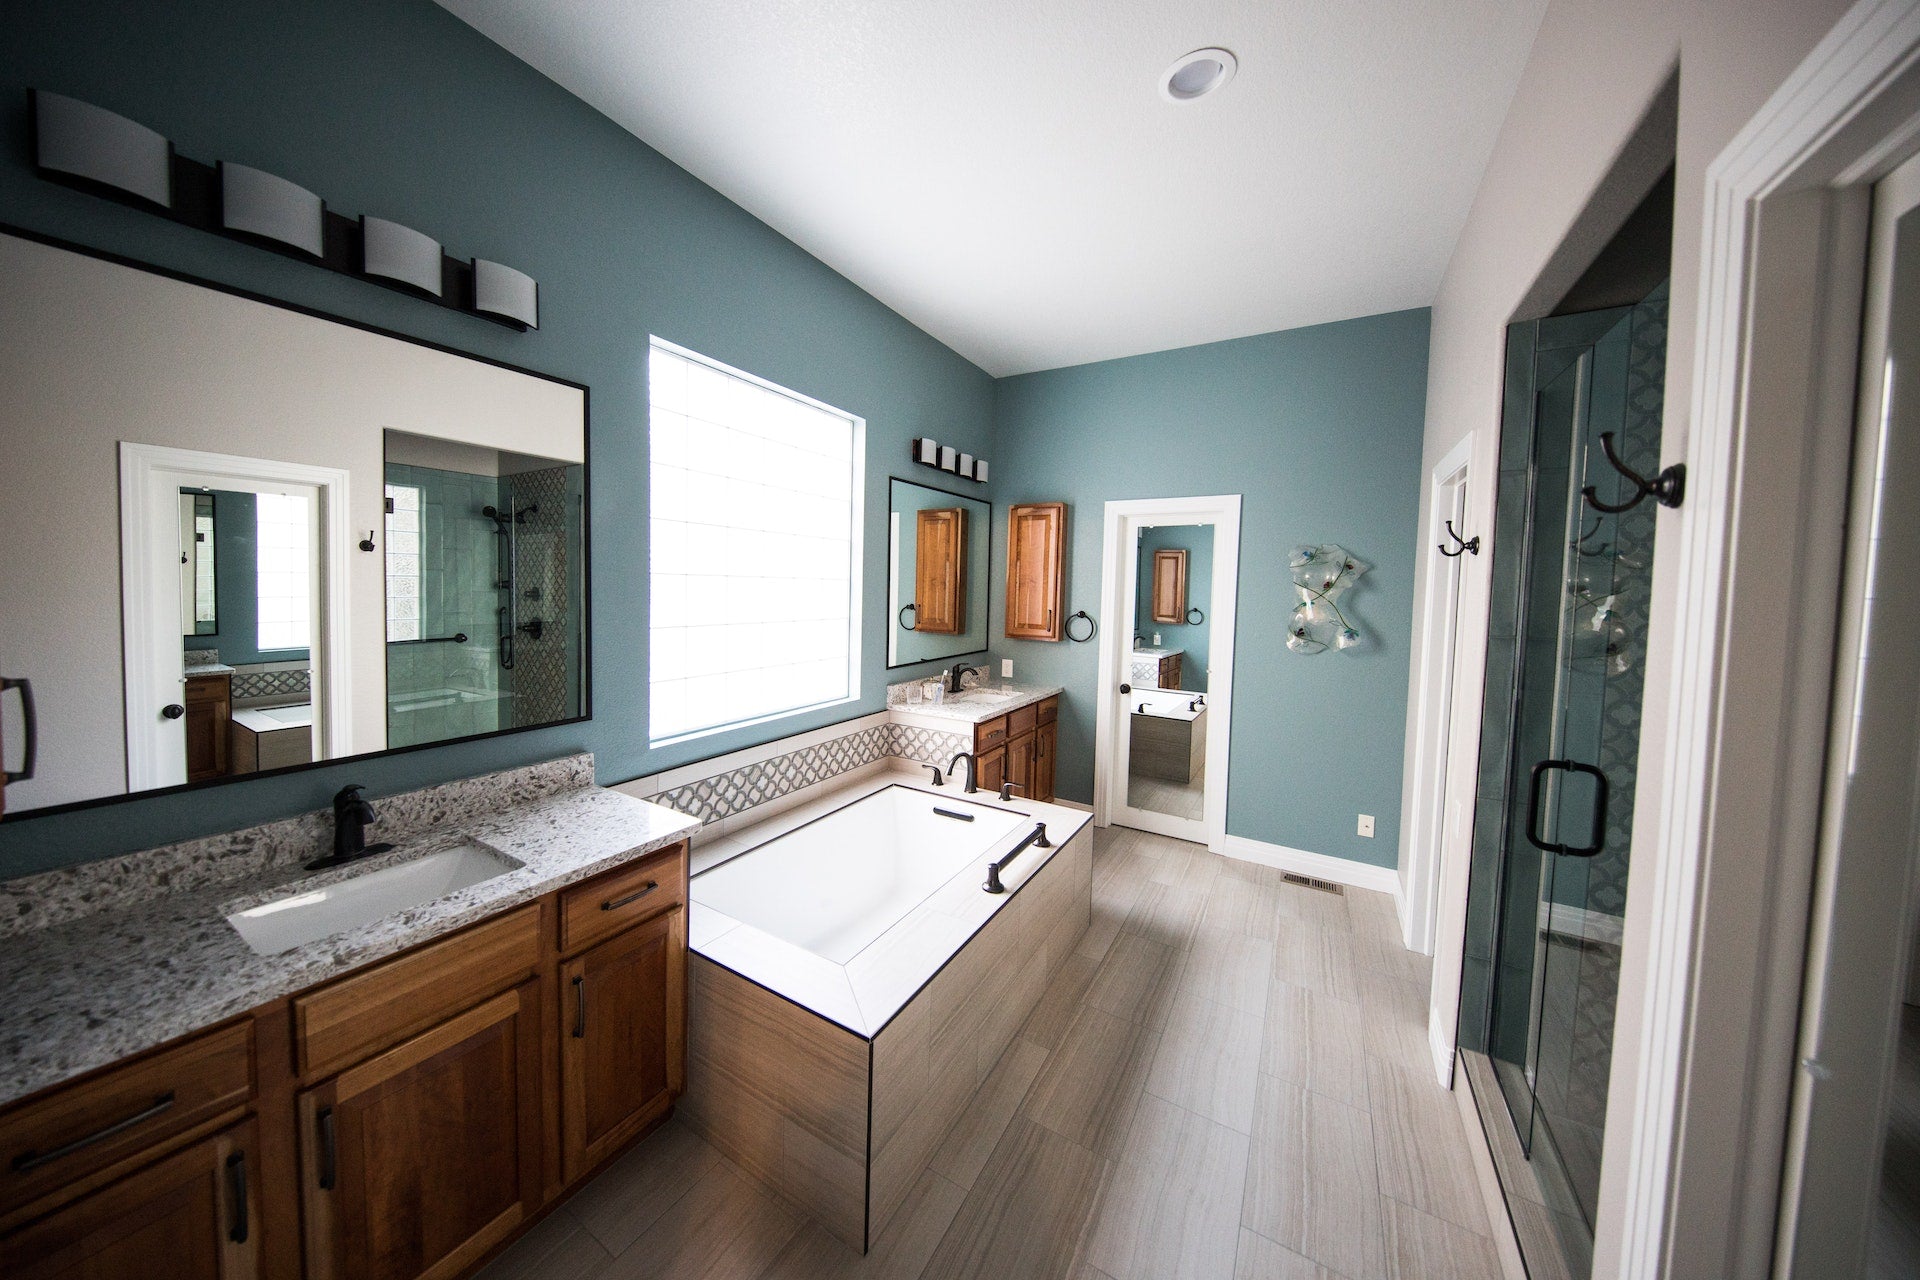 Tips to stylize your bathroom in 2022